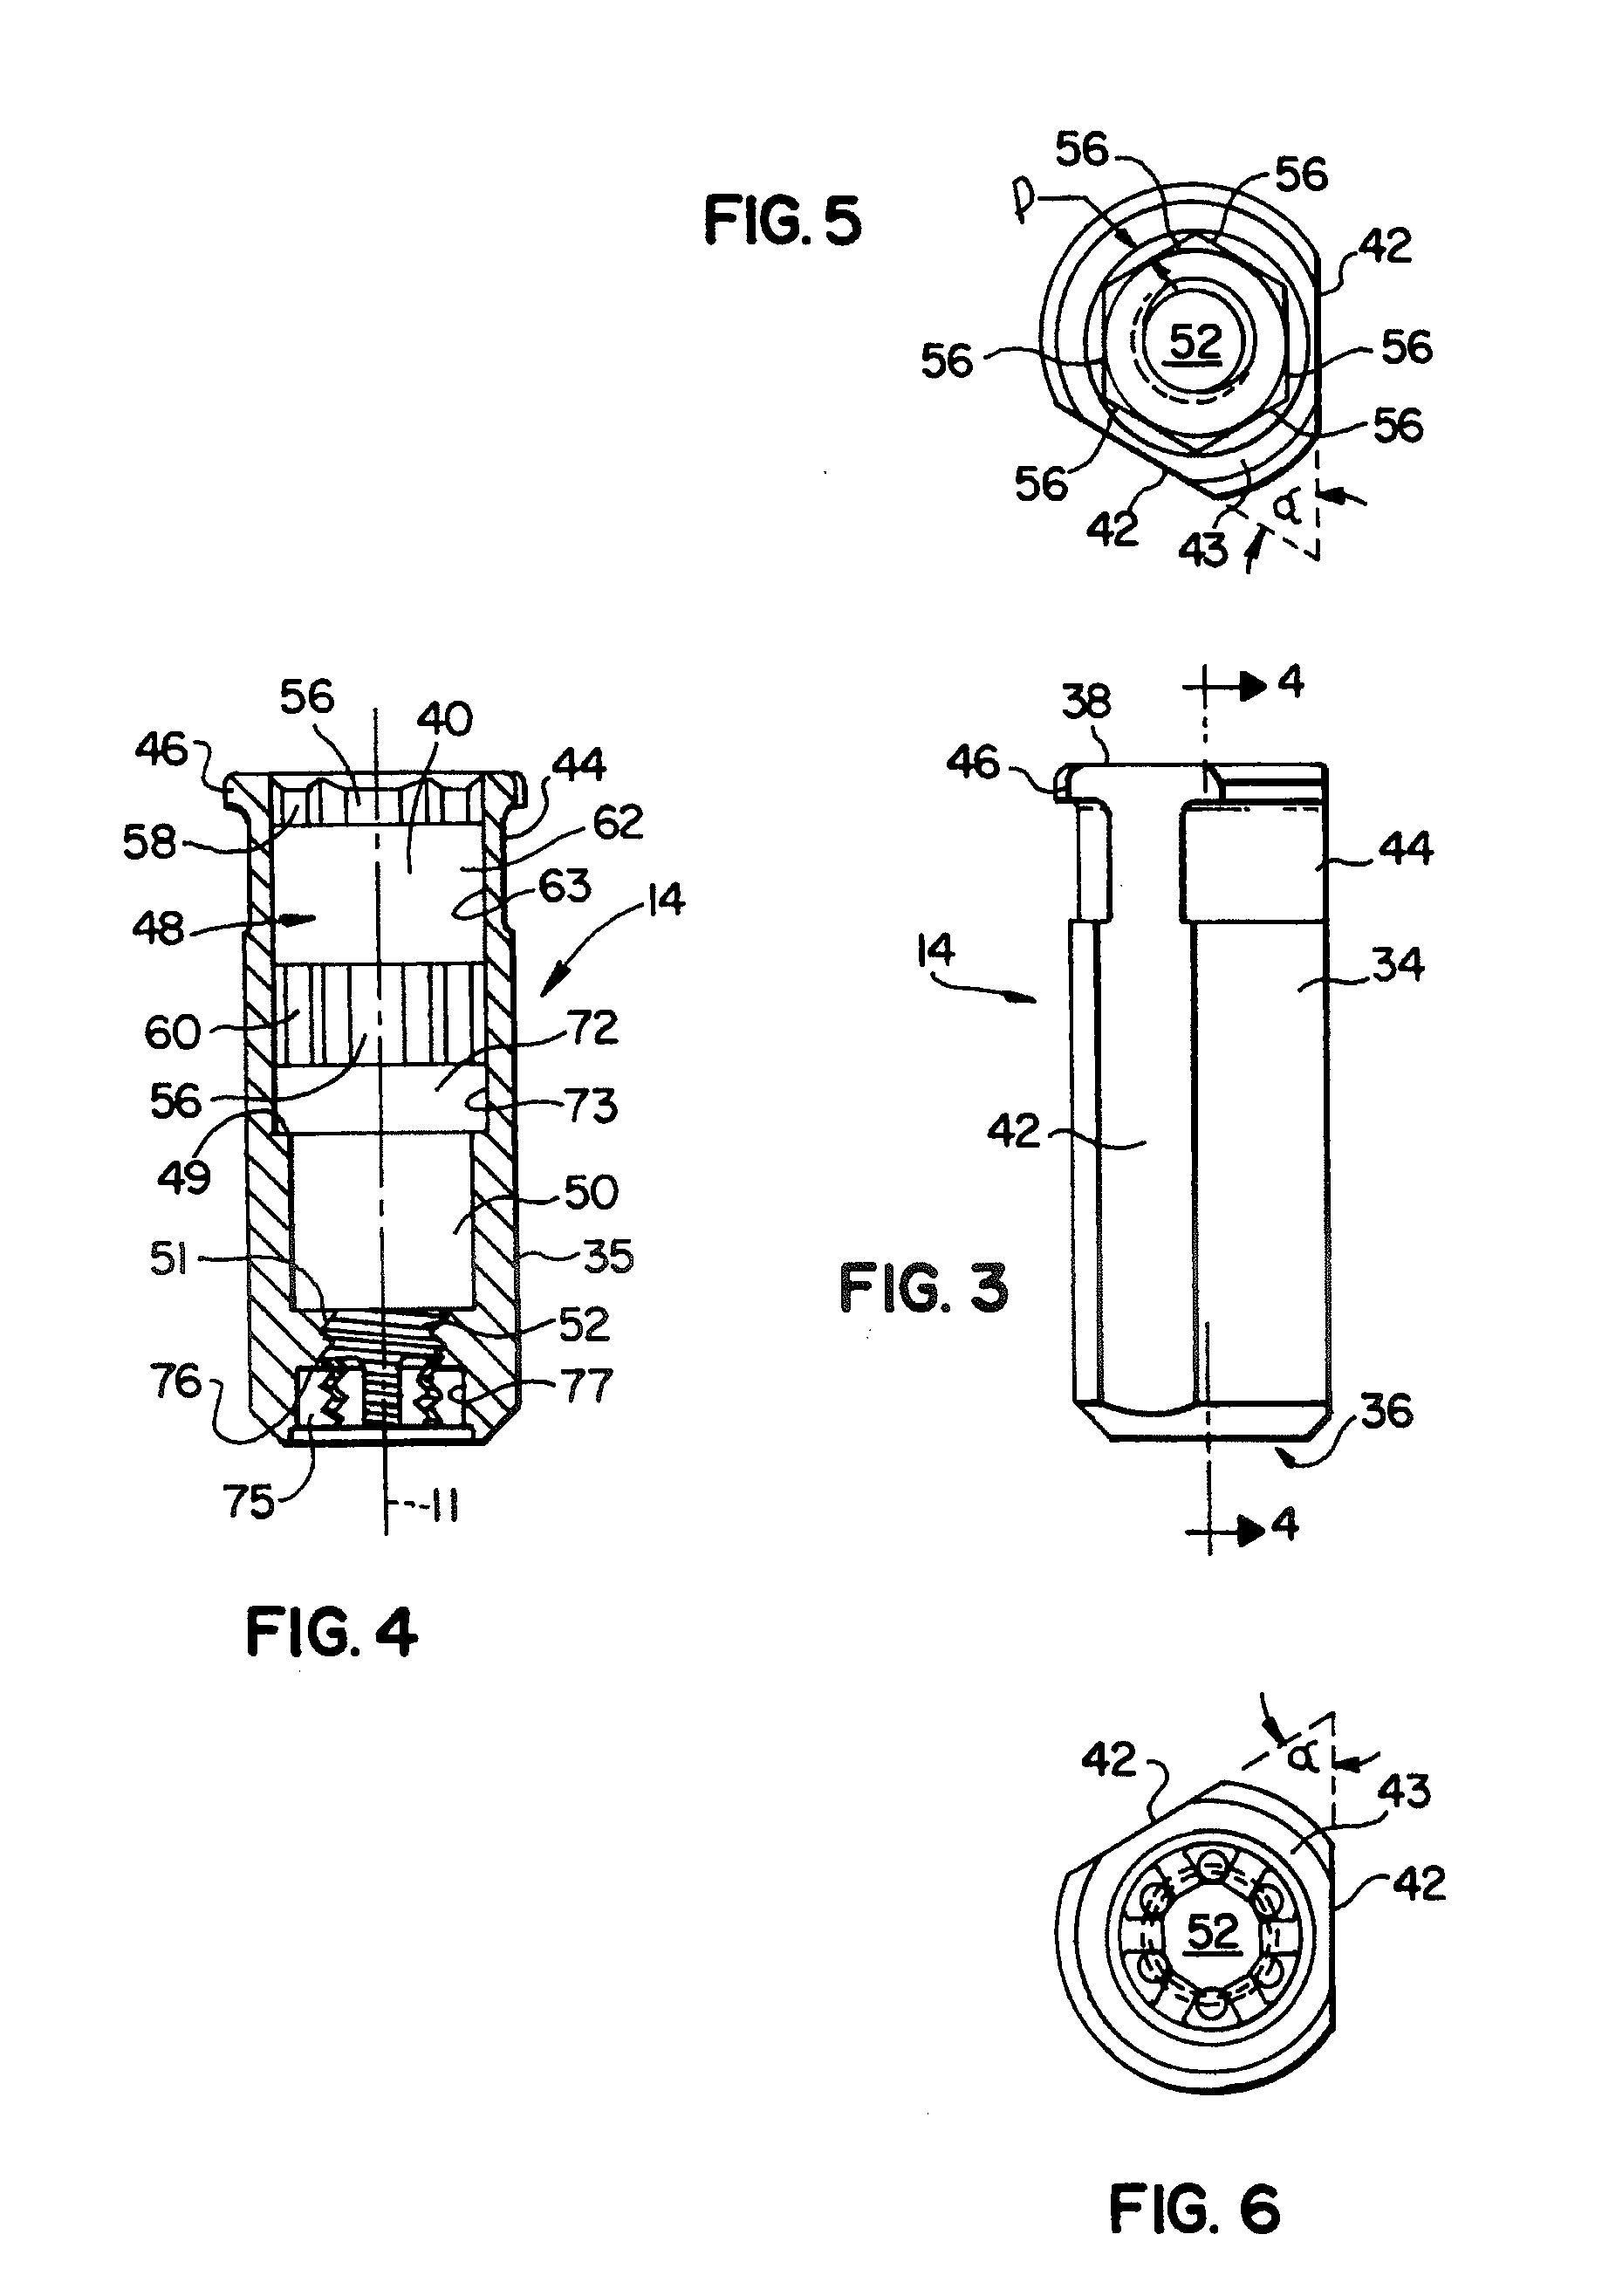 Torque limiting implant drive system